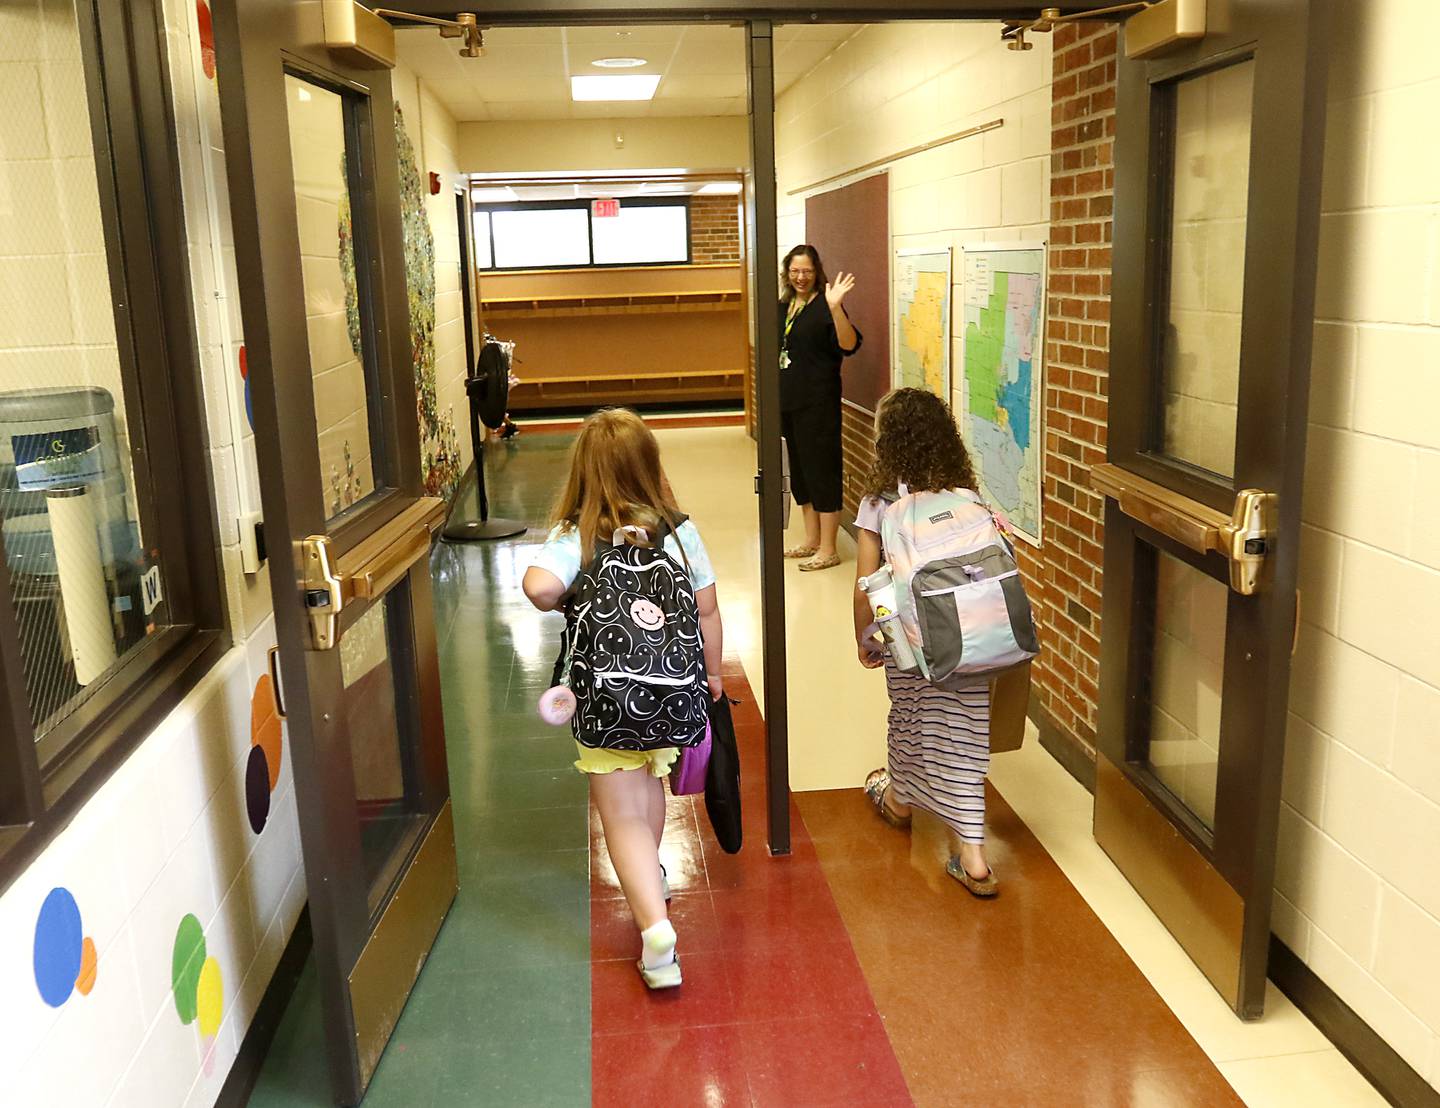 Teacher Kris Princer greats students as they walks down the hall towards their classroom Monday morning, August 15, 2022, during the first day of school at District 200’s Greenwood Elementary School. Many McHenry County area schools return to session this week.